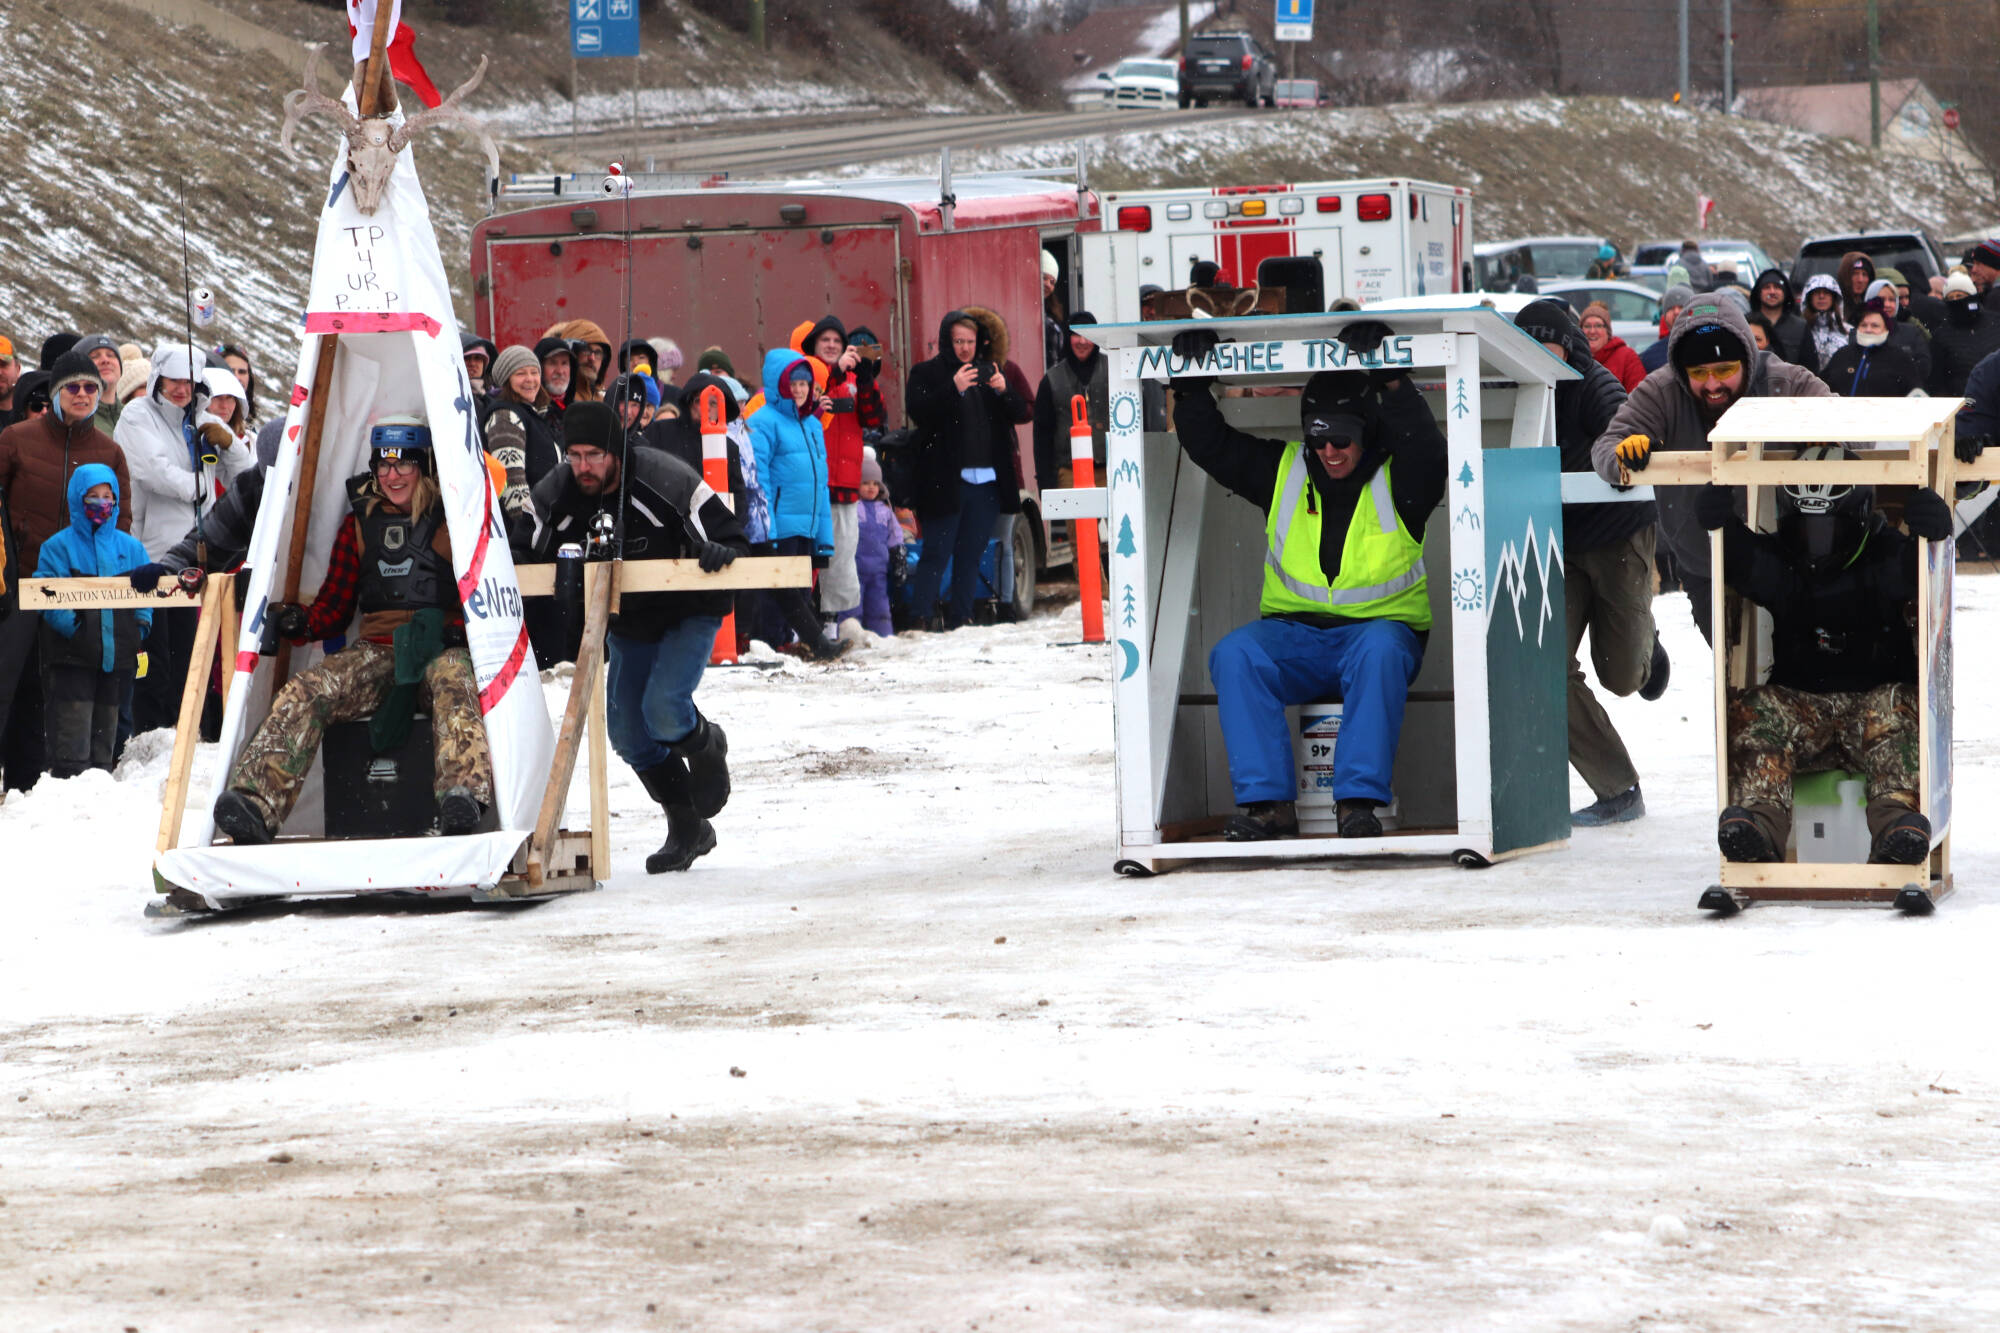 28233549_web1_220224-VMS-outhouse-races-outhouses_3